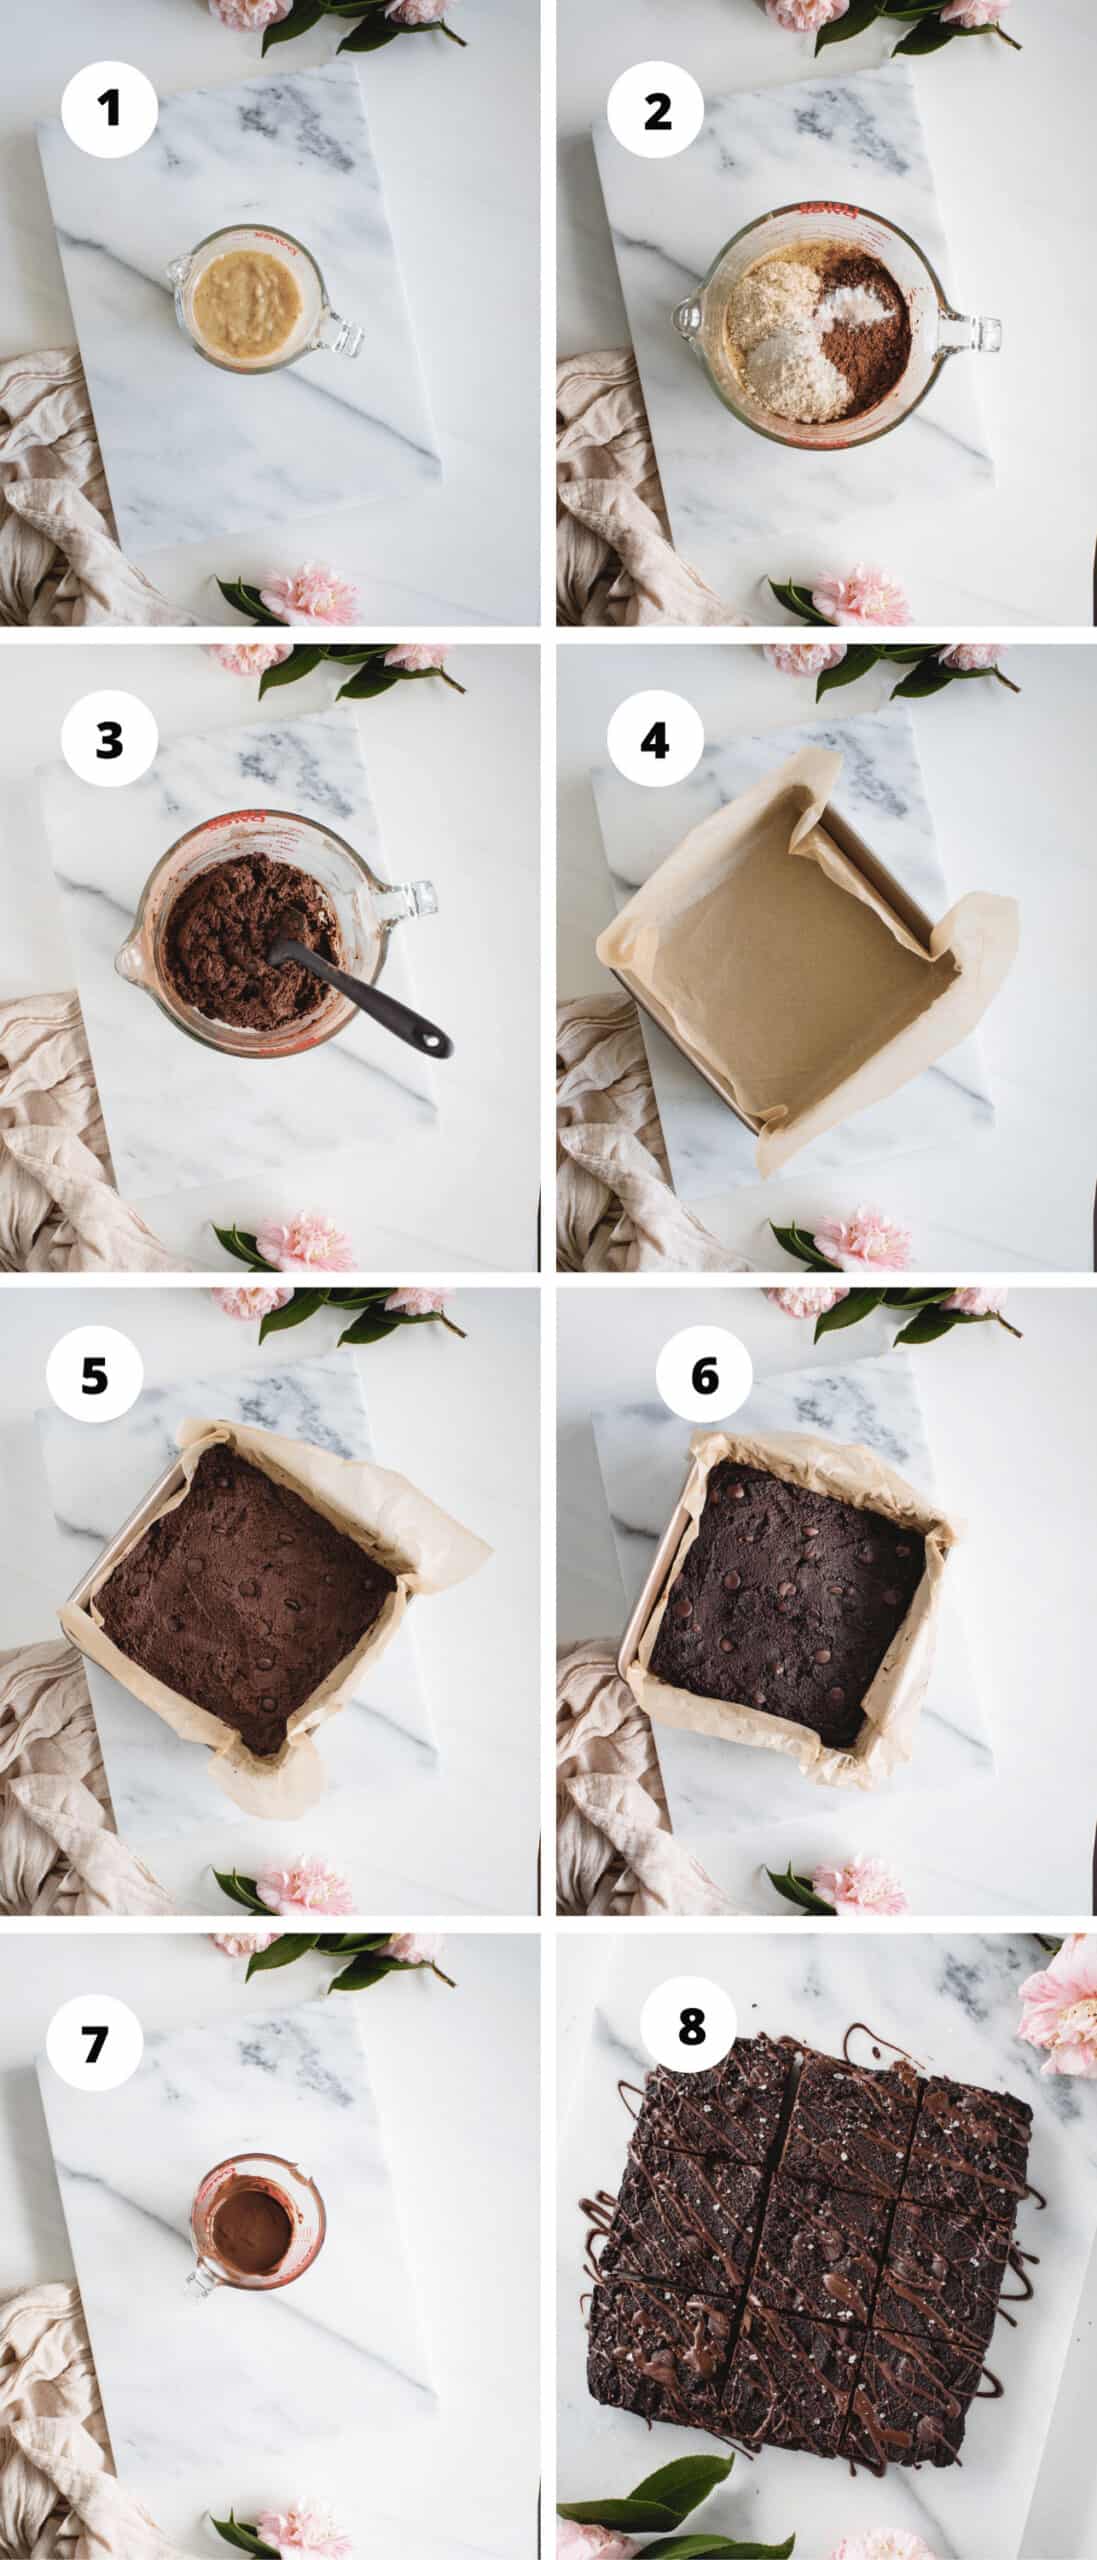 Numbered process pictures showing 8 steps needed to make healthy banana brownies